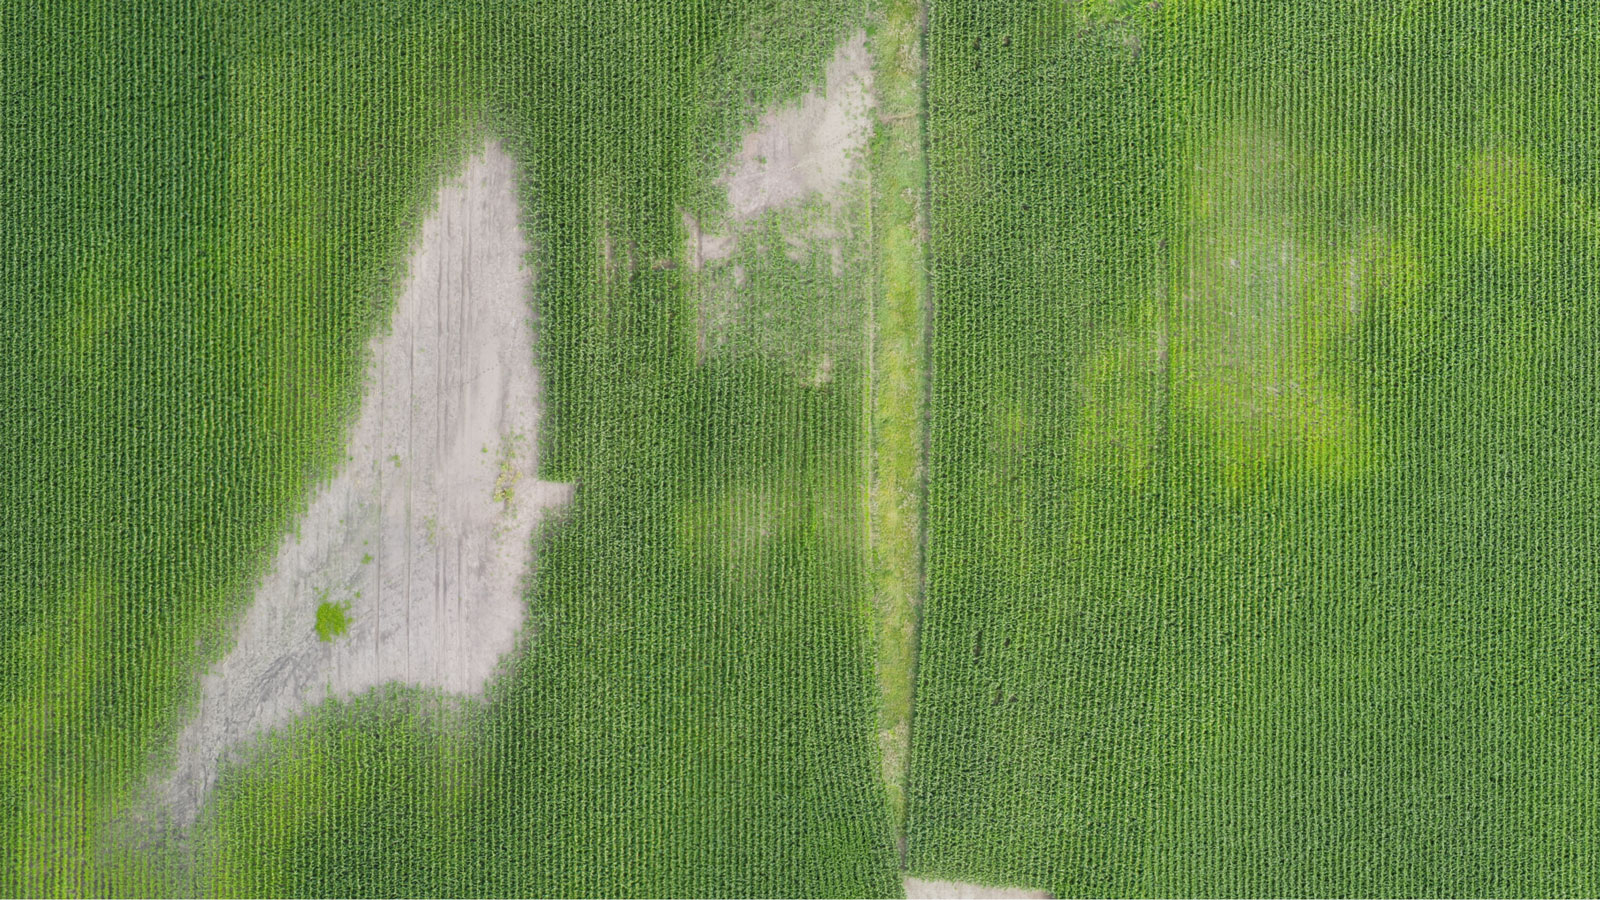 orthomosaic output for agriculture mapping using ag drone